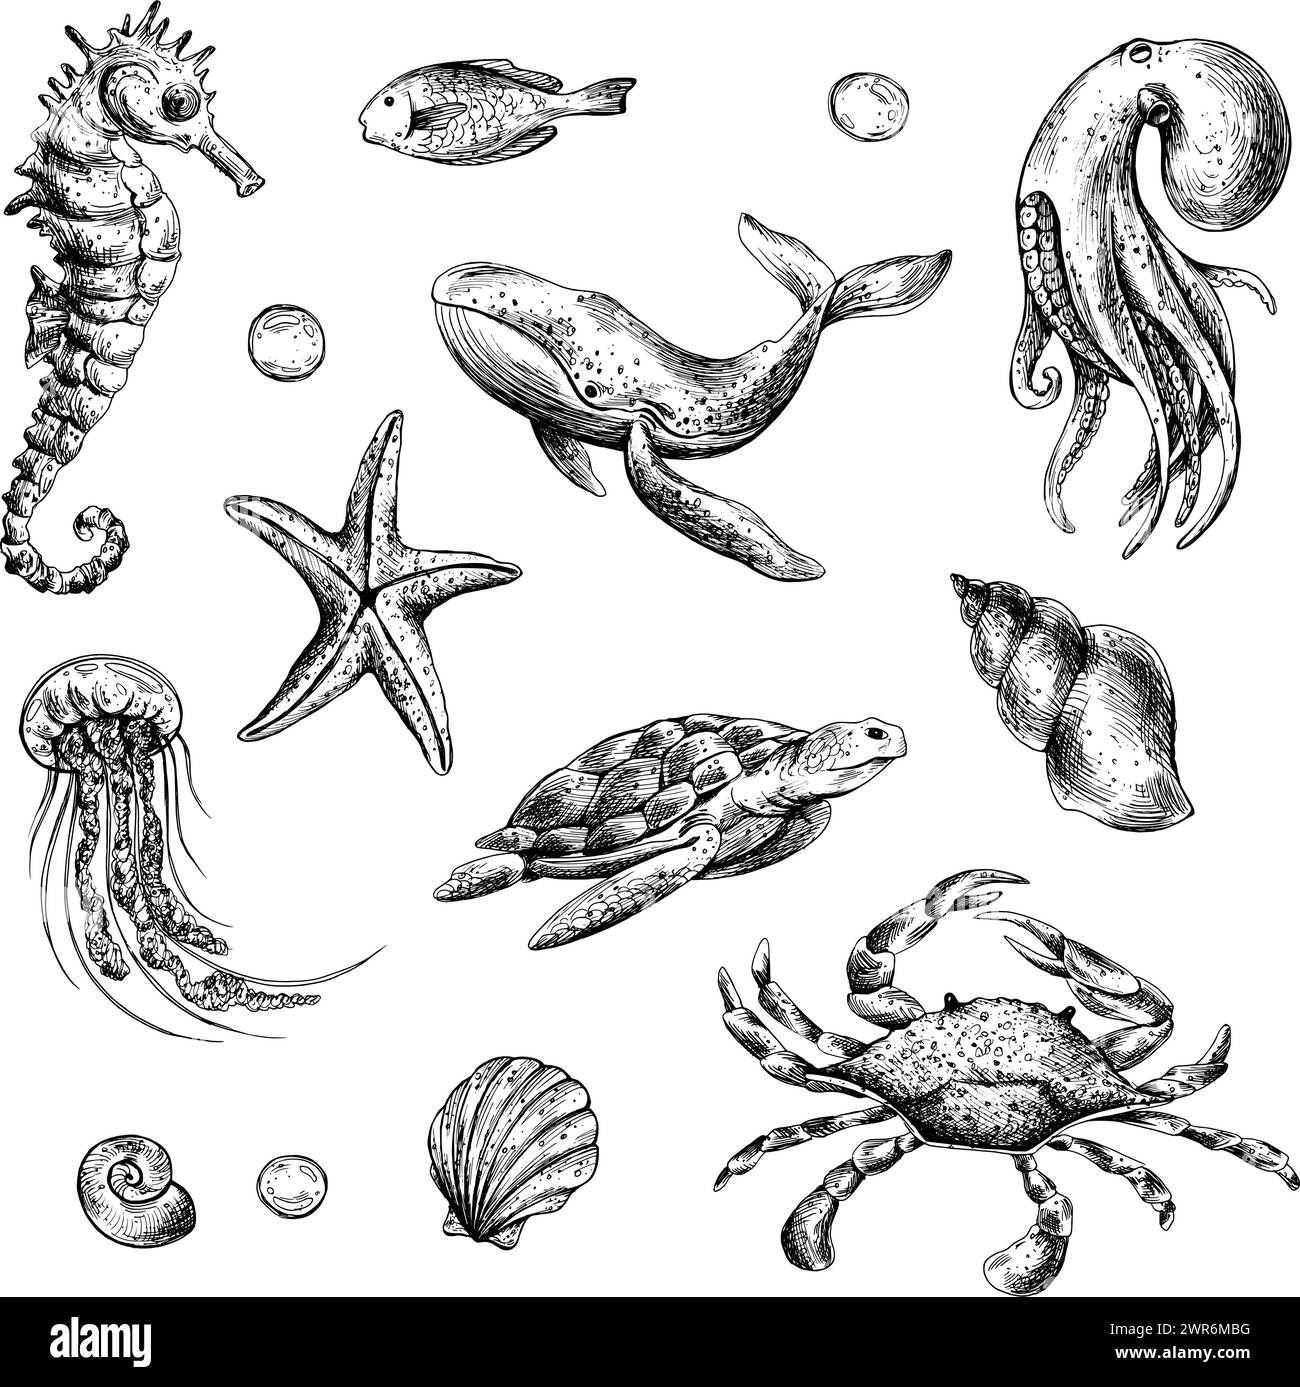 Underwater world clipart with sea animals whale, turtle, octopus, seahorse, starfish, shells, coral and algae. Graphic illustration hand drawn in Stock Vector